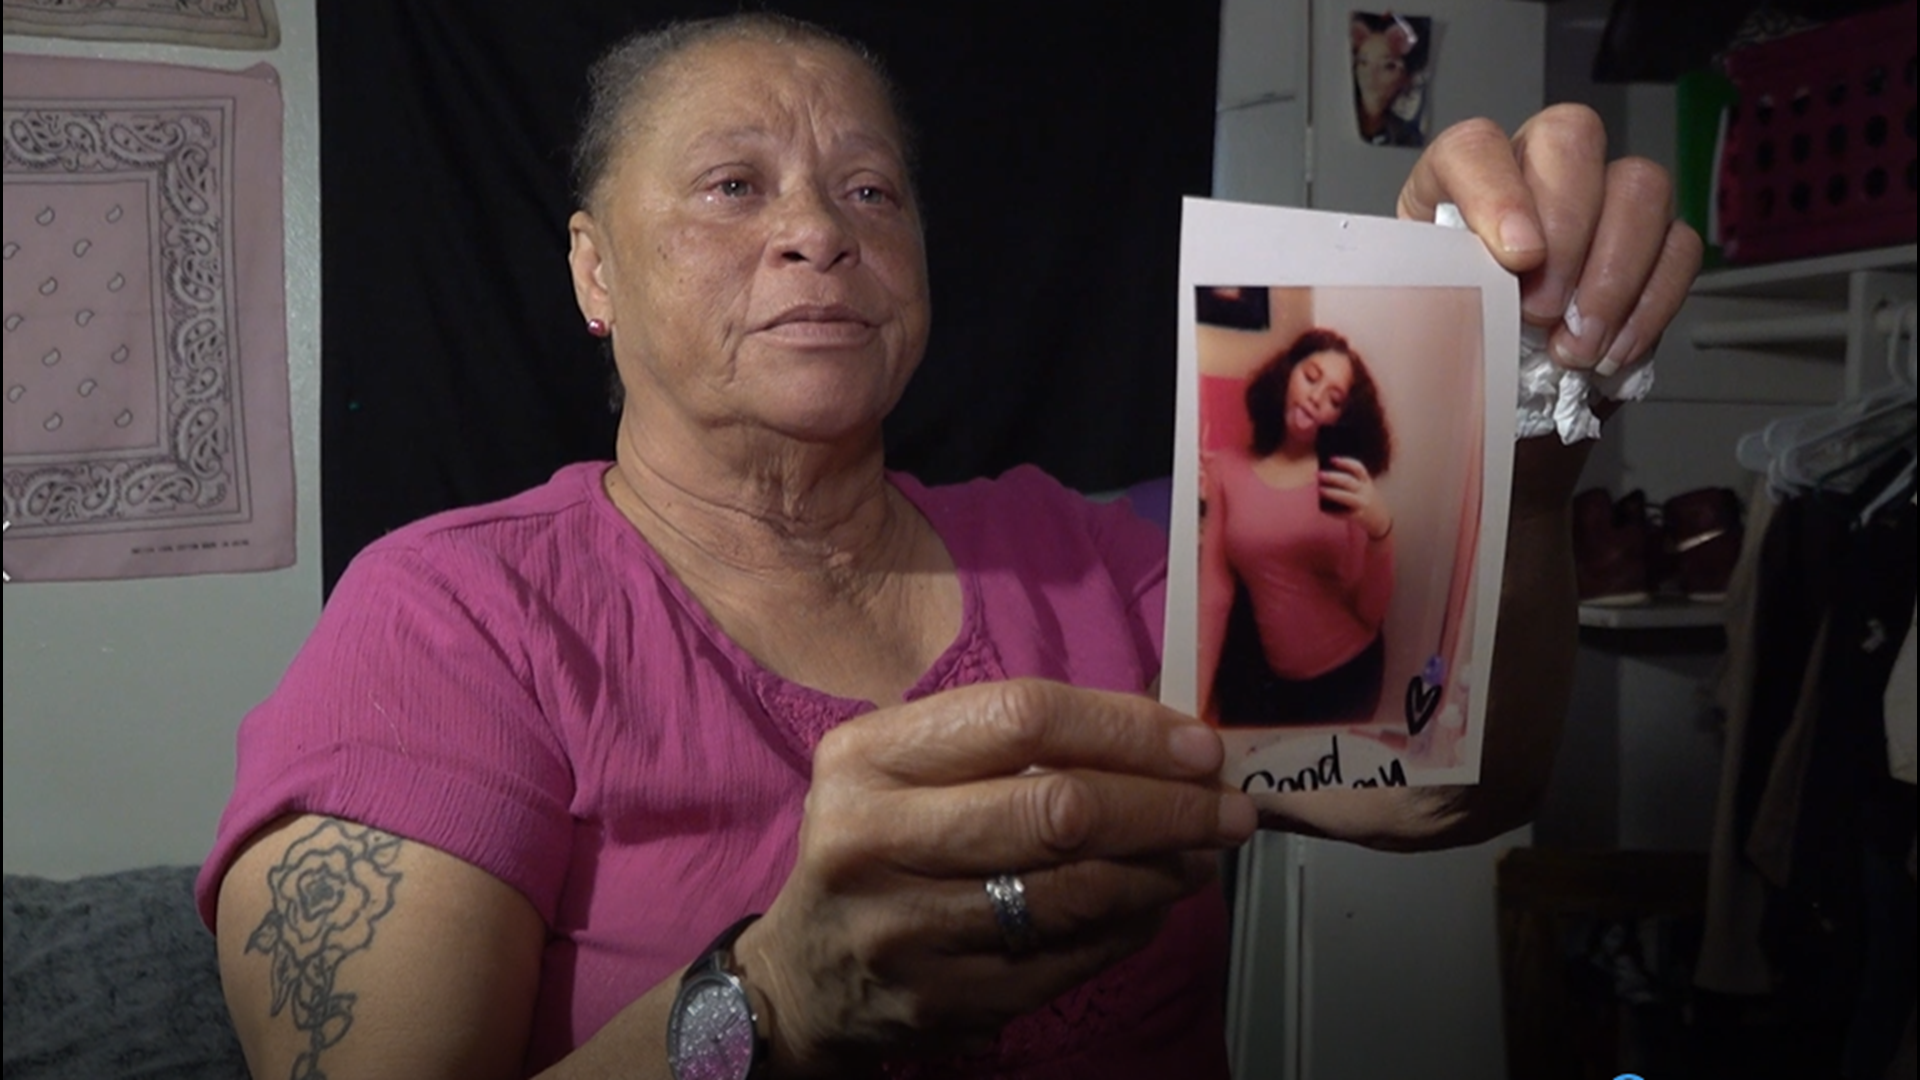 Sherri Murphy believes her 14-year-old granddaughter could be a victim of sex trafficking and she fears for her safety.